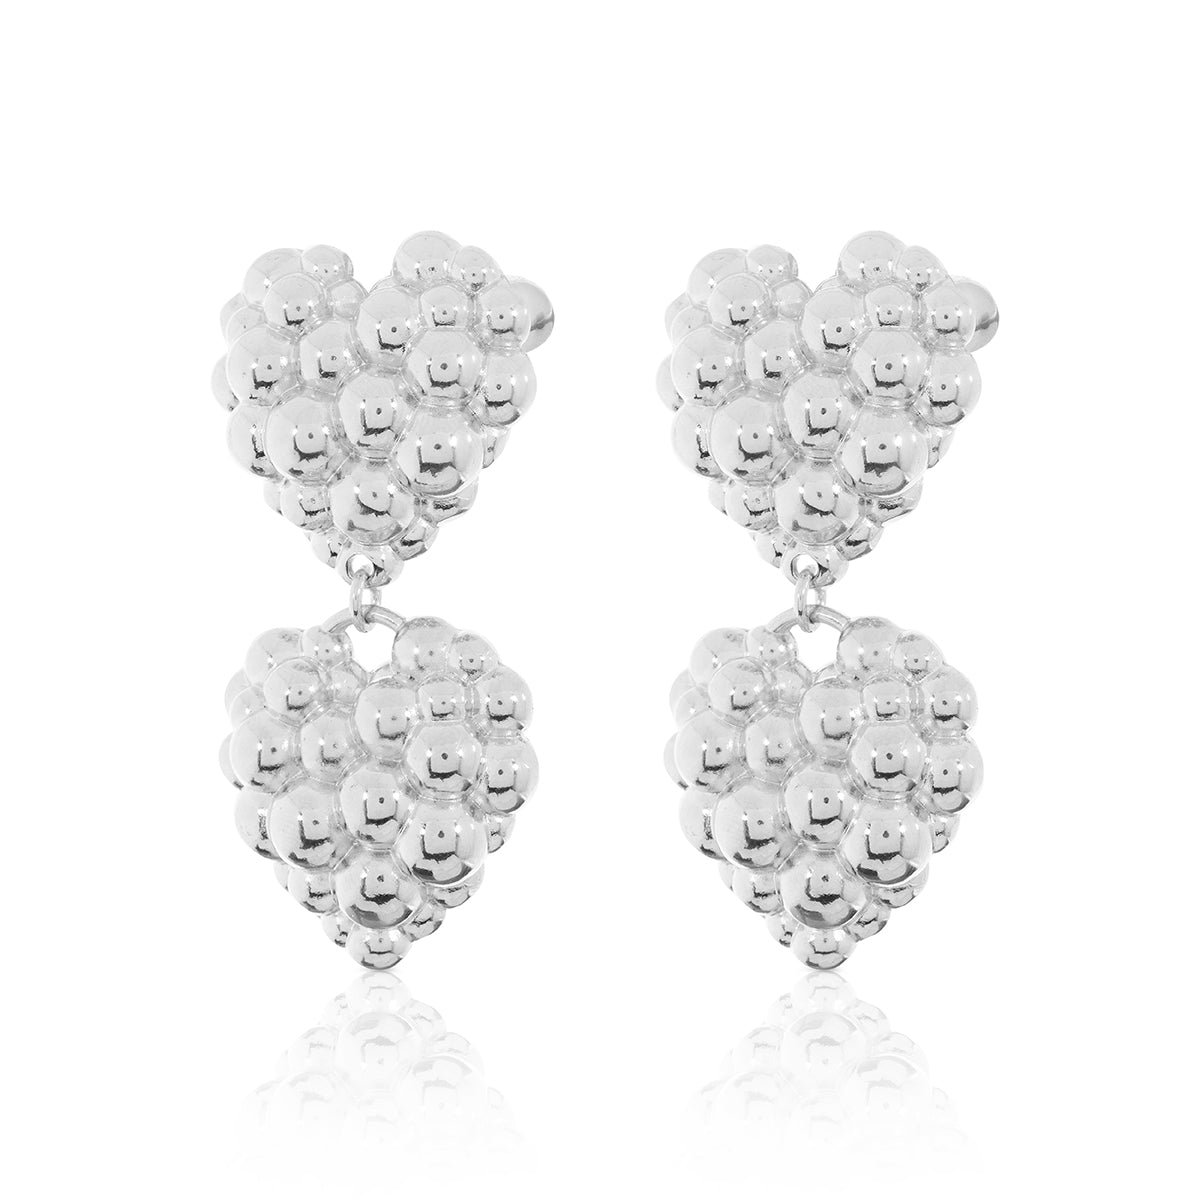 DOUBLE LOVE EARRING - LARGE SILVER